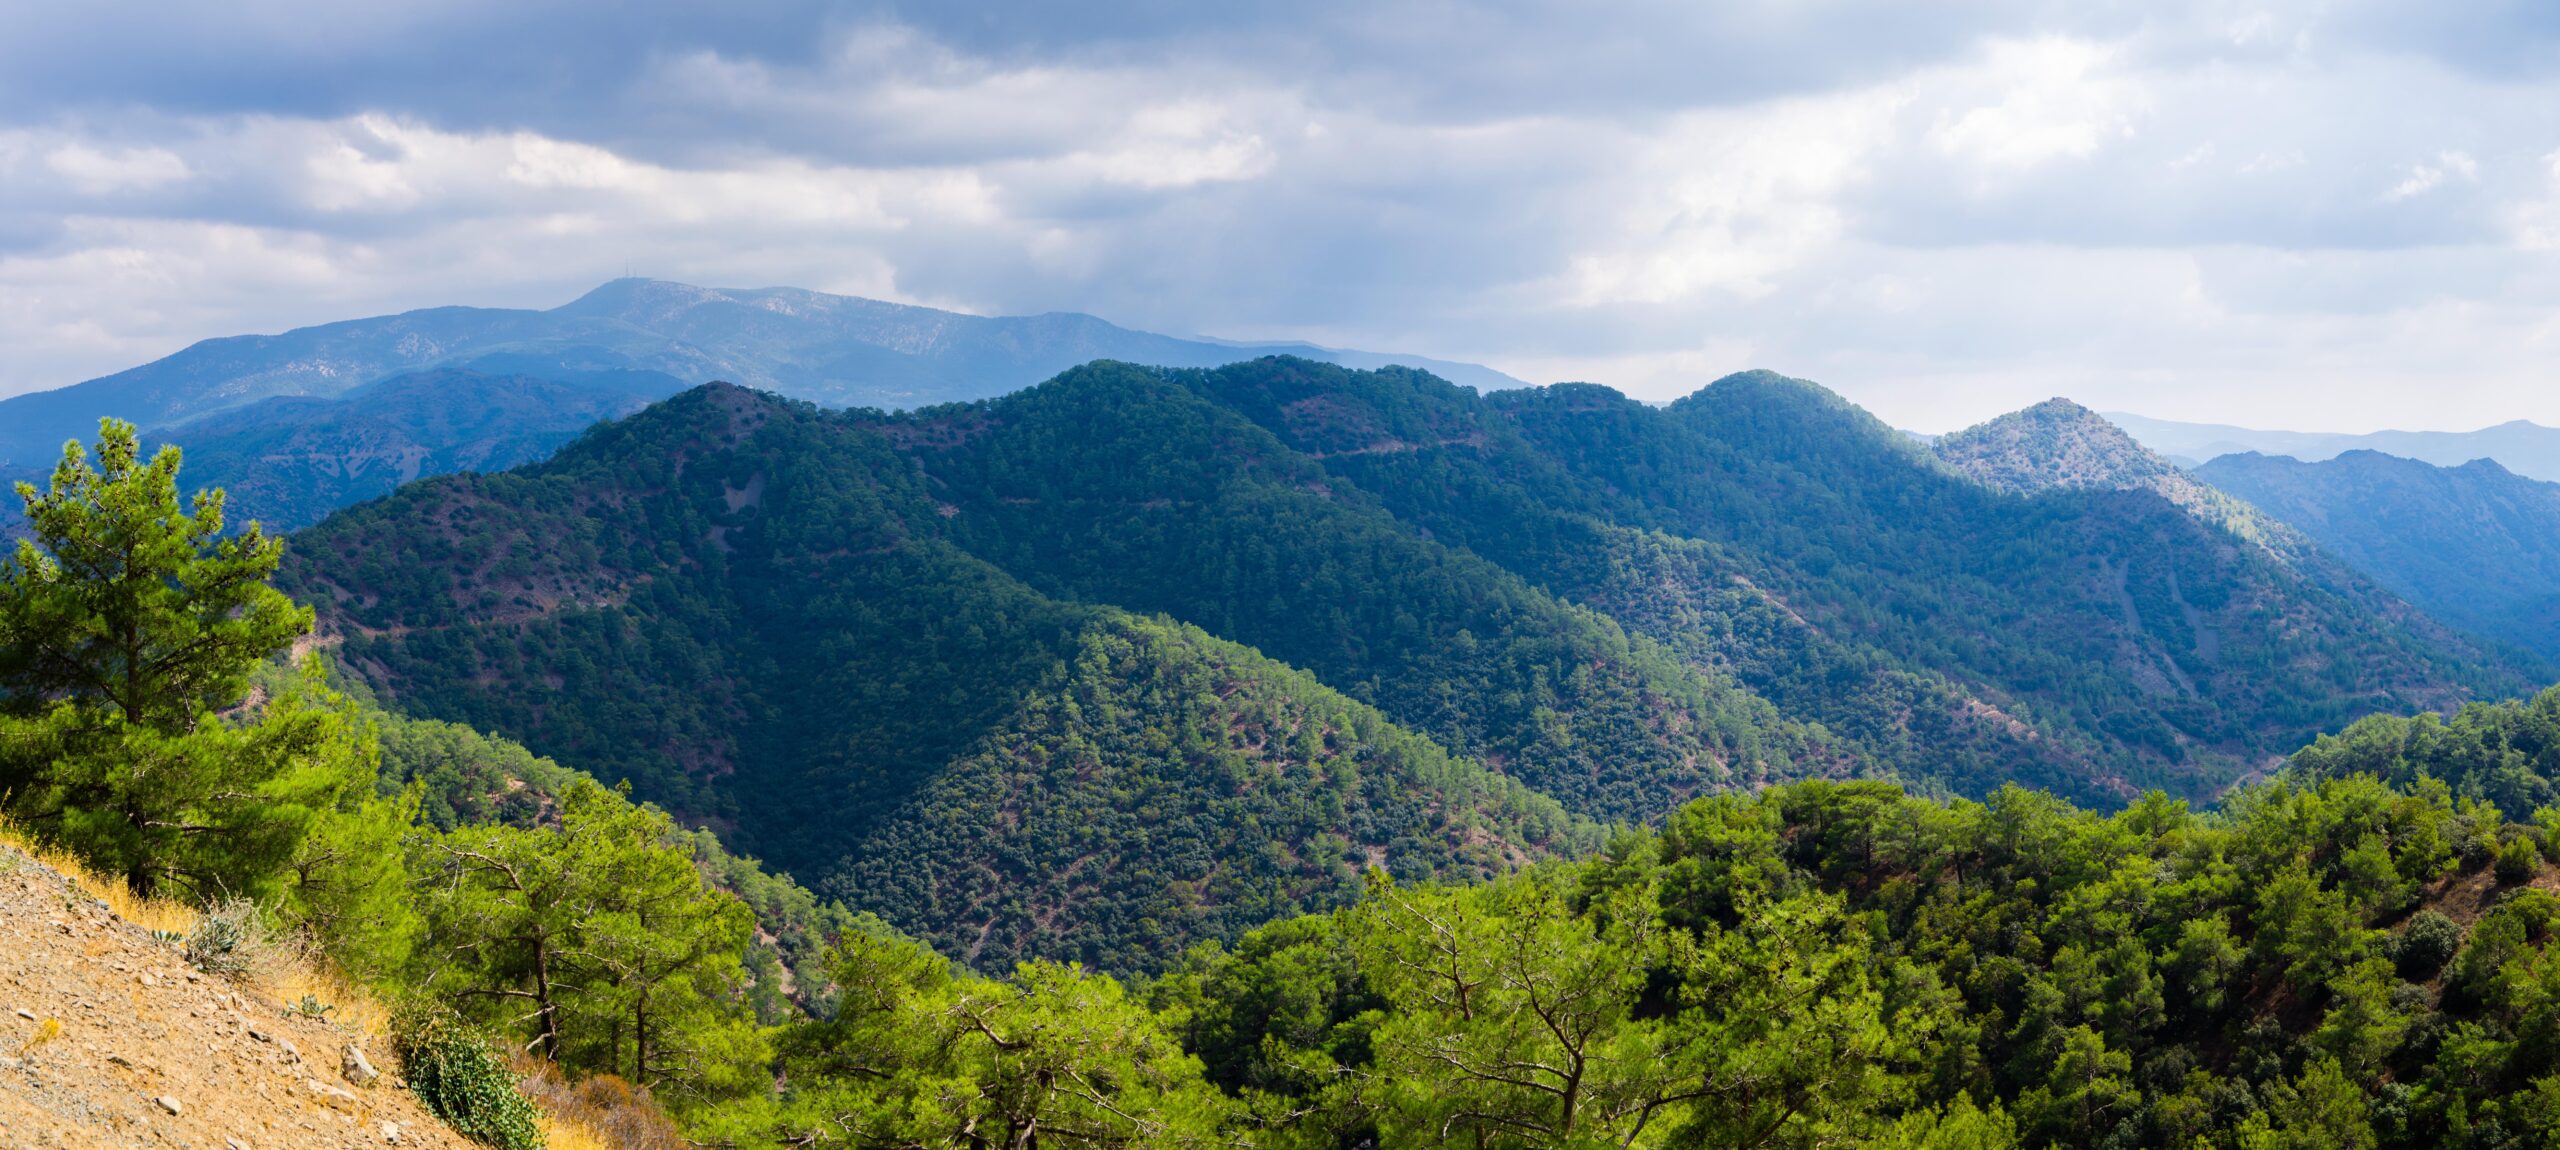 Panoramic top view over mountain range with green hills and pine forests in front of a cloudy sky.